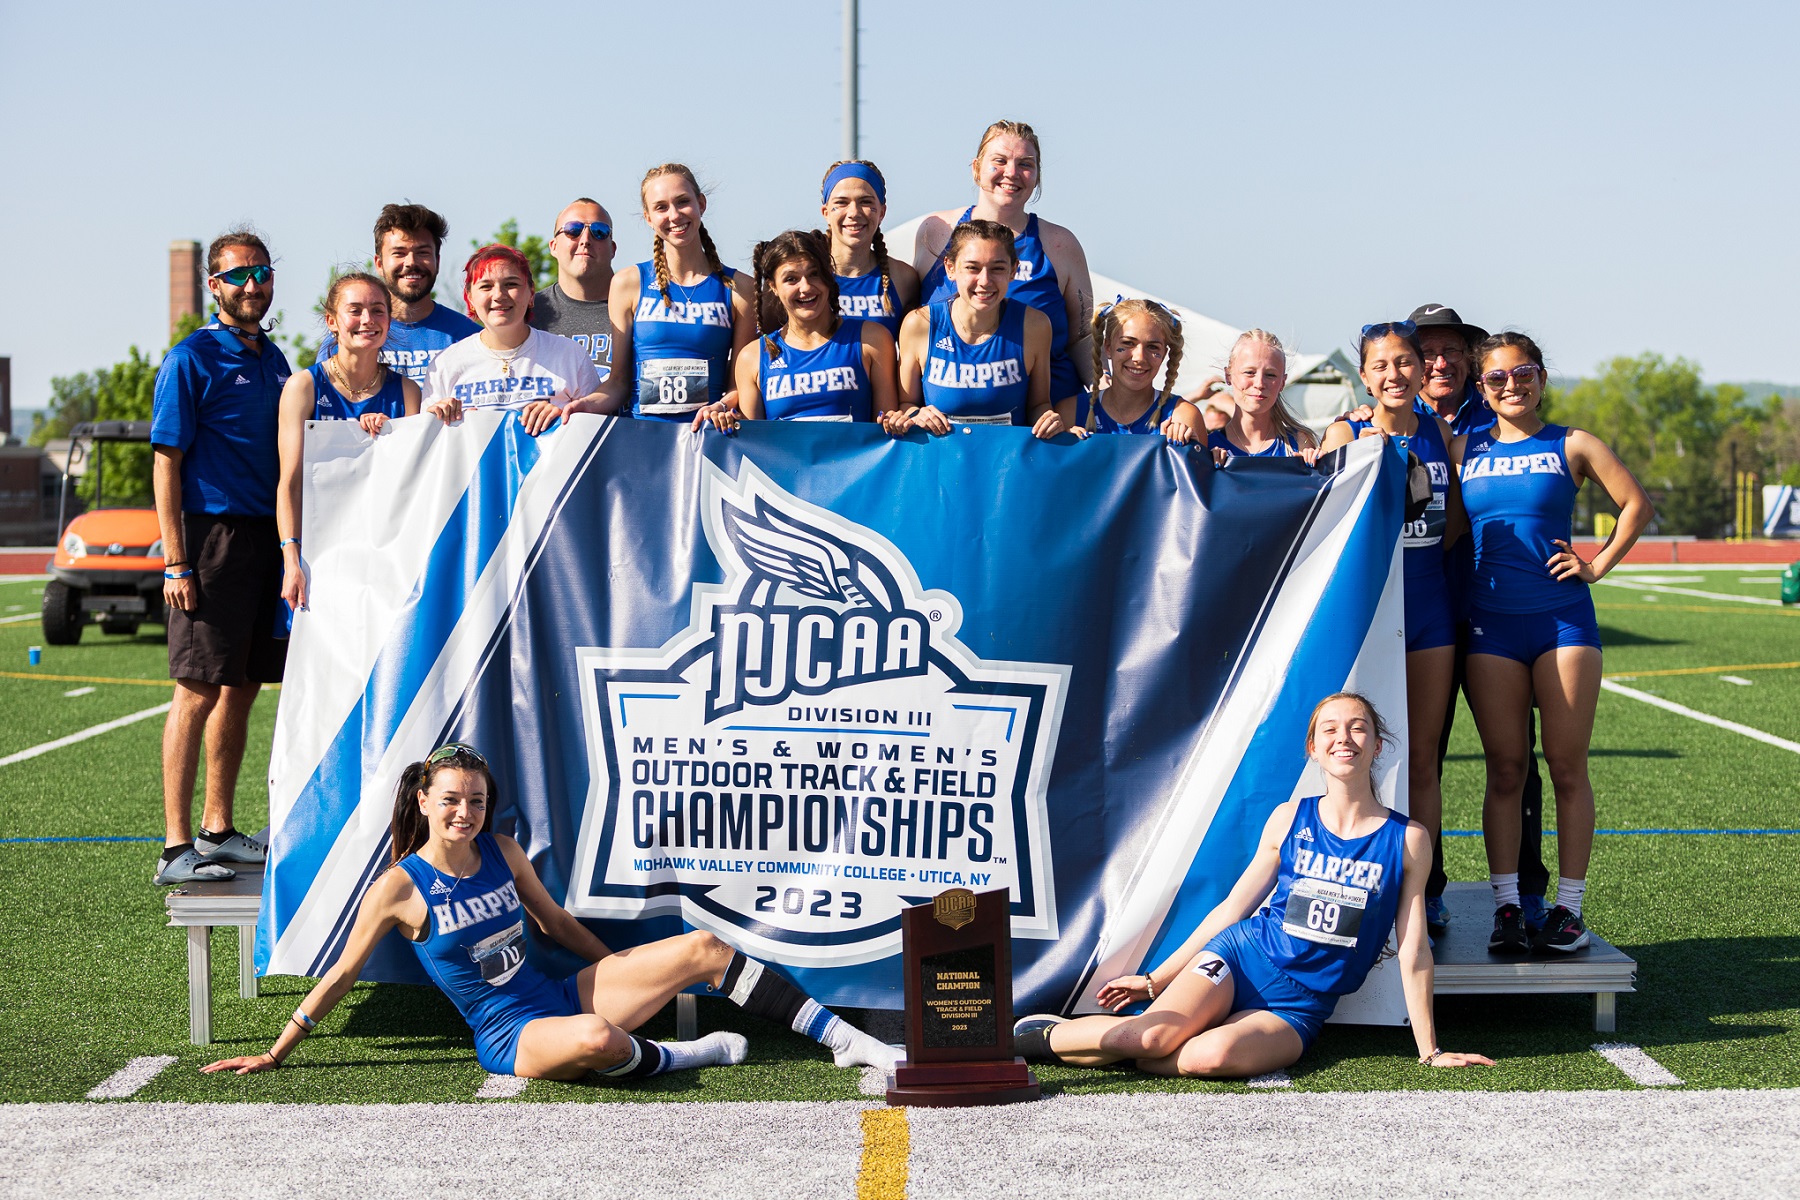 Harper Women's Track and Field Team celebrates winning the 2023 NJCAA Division III National Championship.